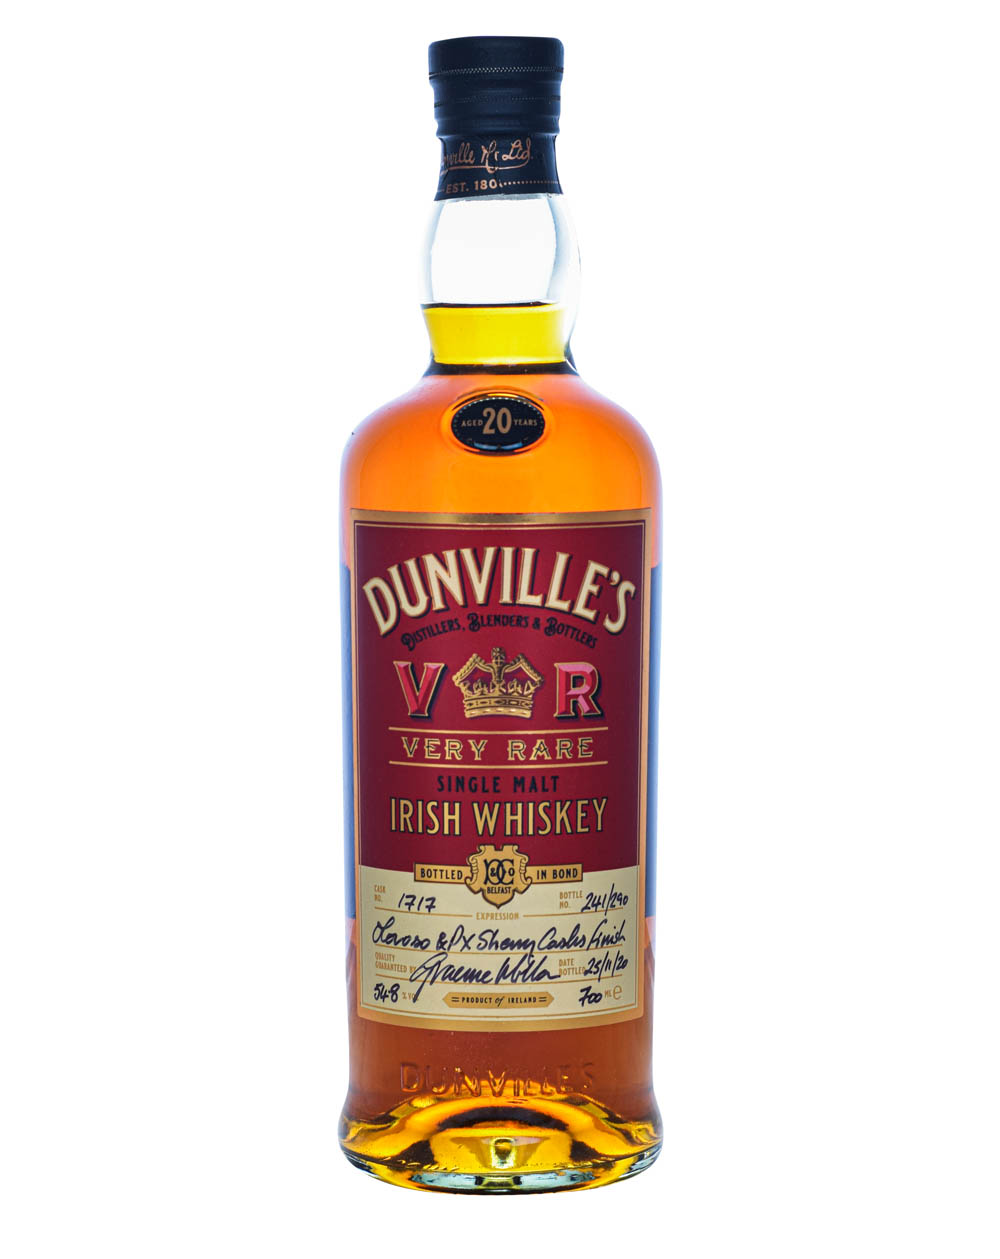 Dunville's Irish Whiskey 2020 Bottled in Bond Musthave Malts MHM